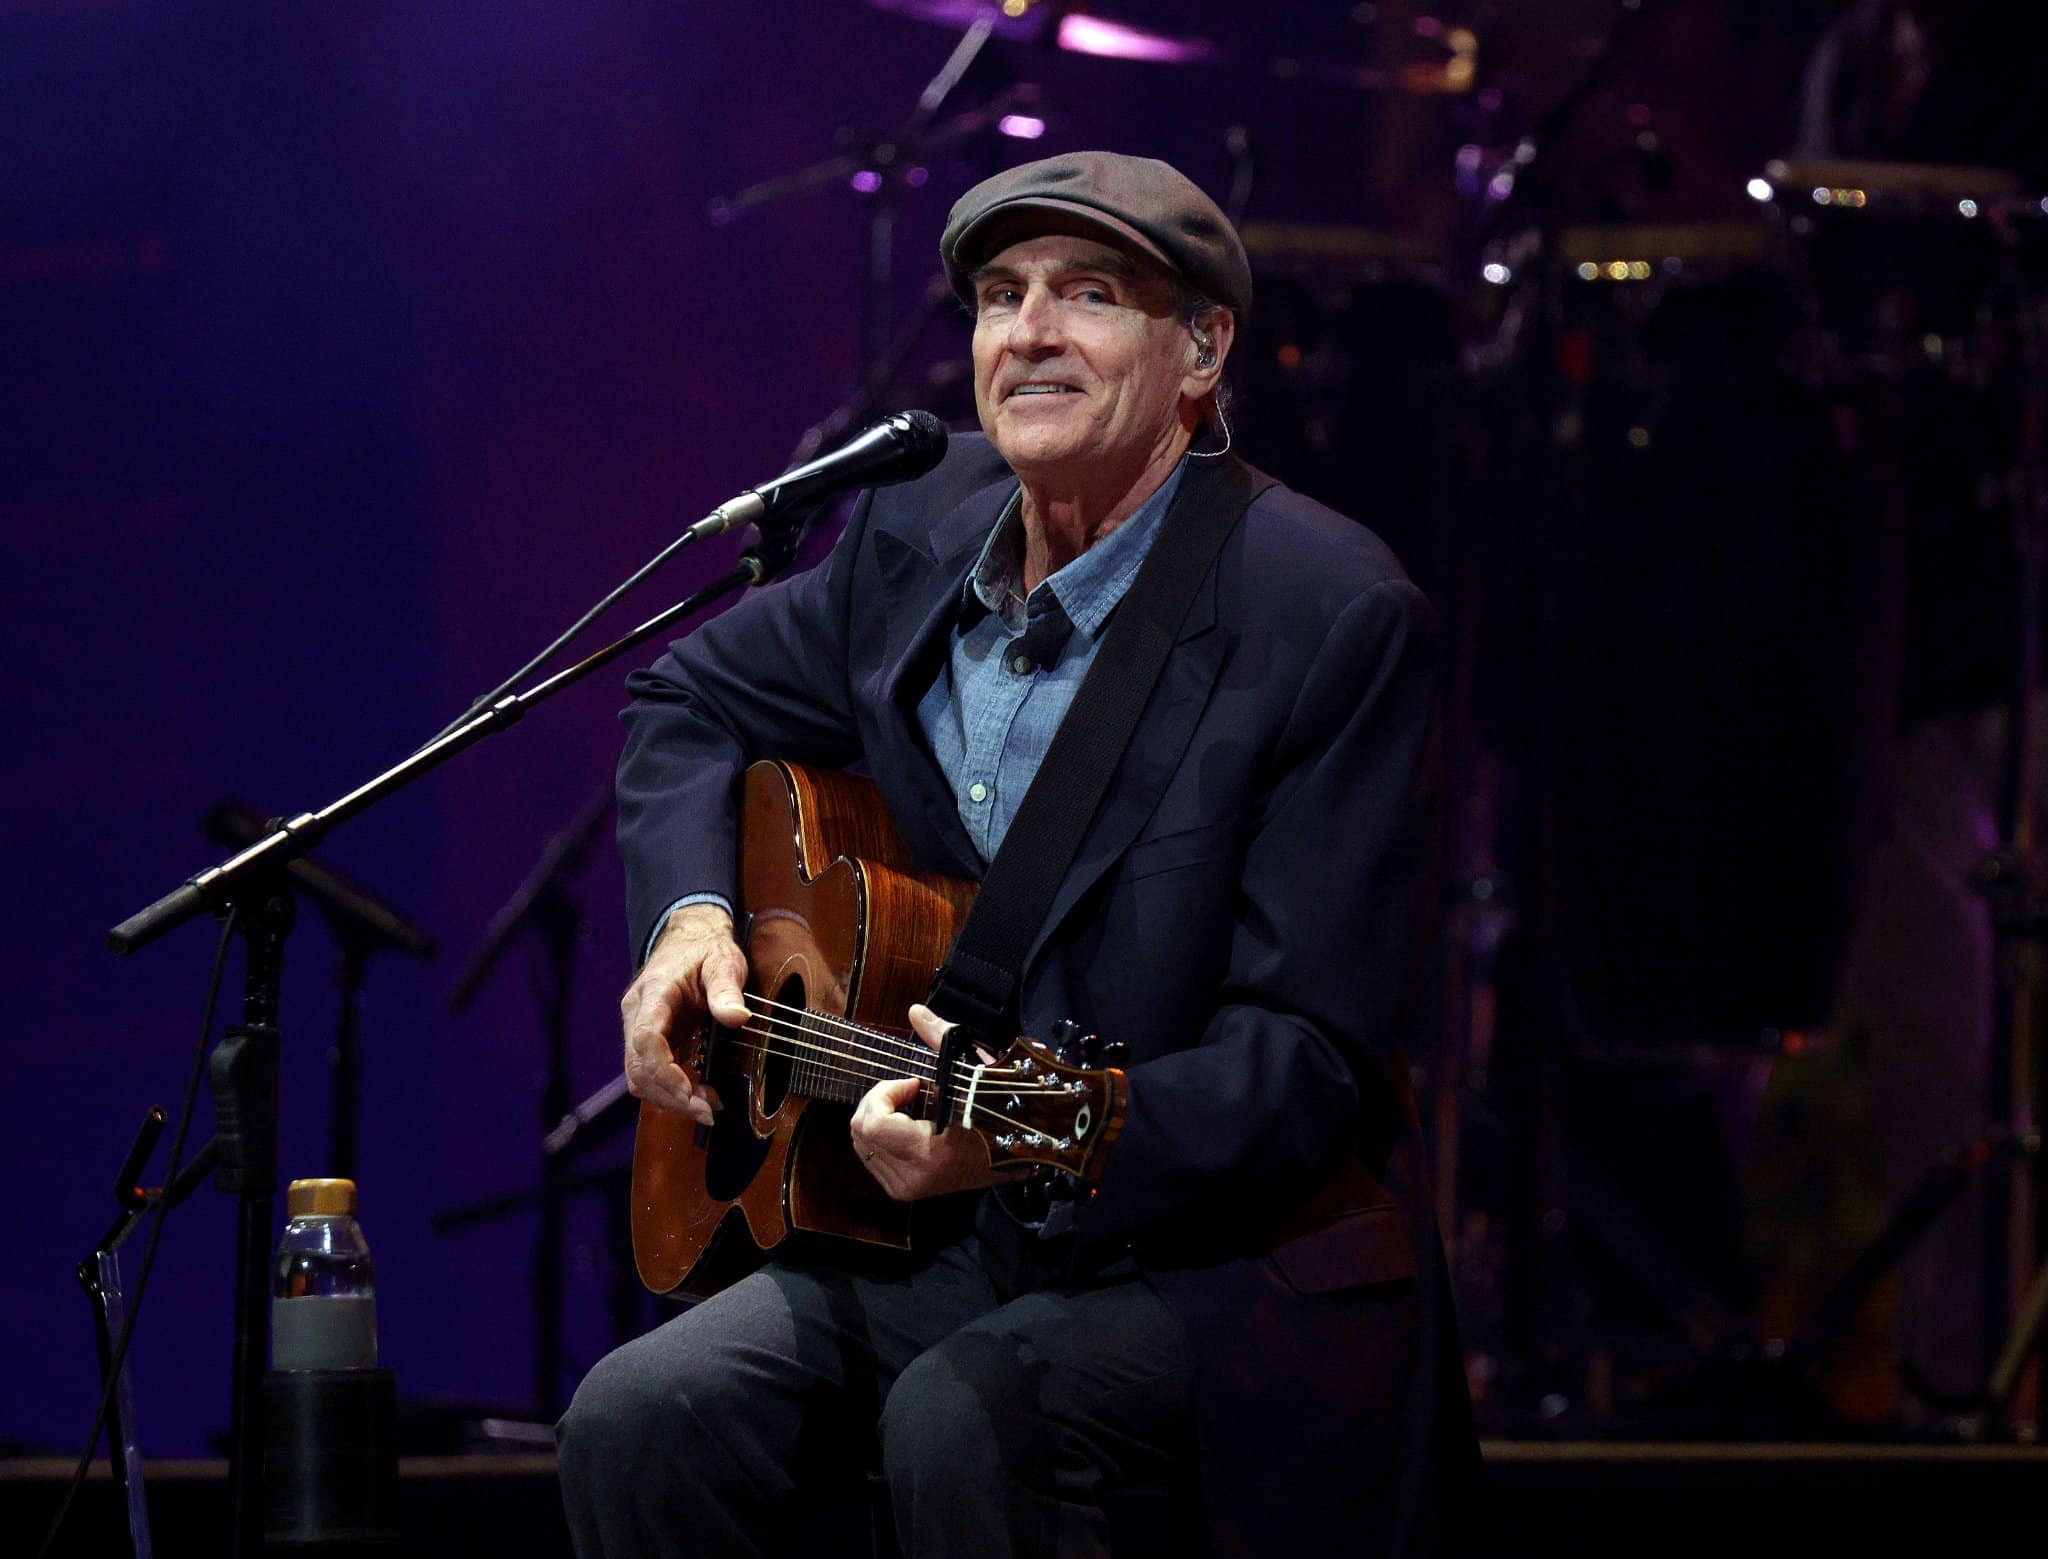 James Taylor to perform at Brandon Amphitheater during 2023 U.S. Summer